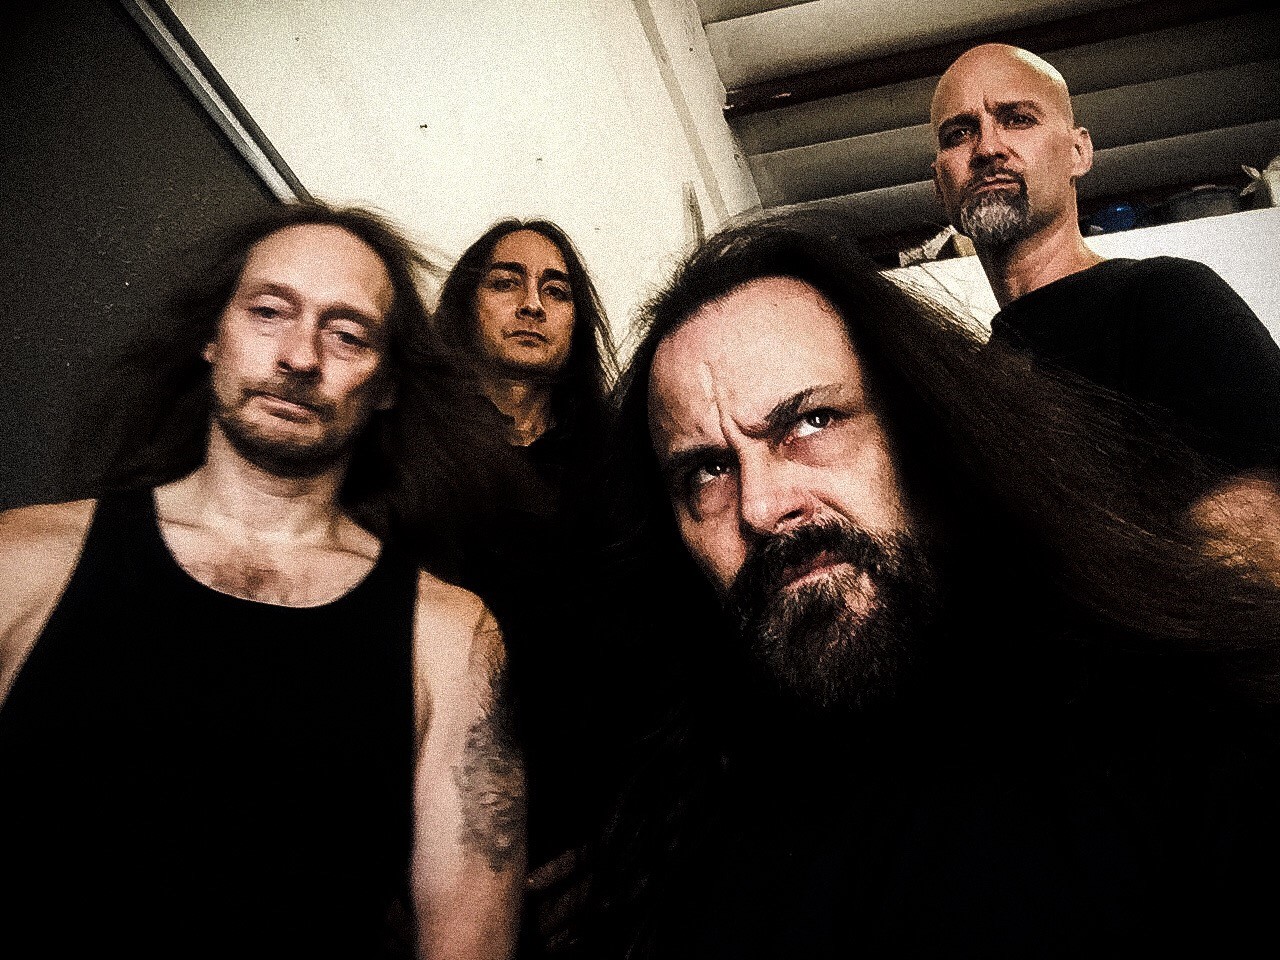 Summer Slaughter hints that Deicide will join tour